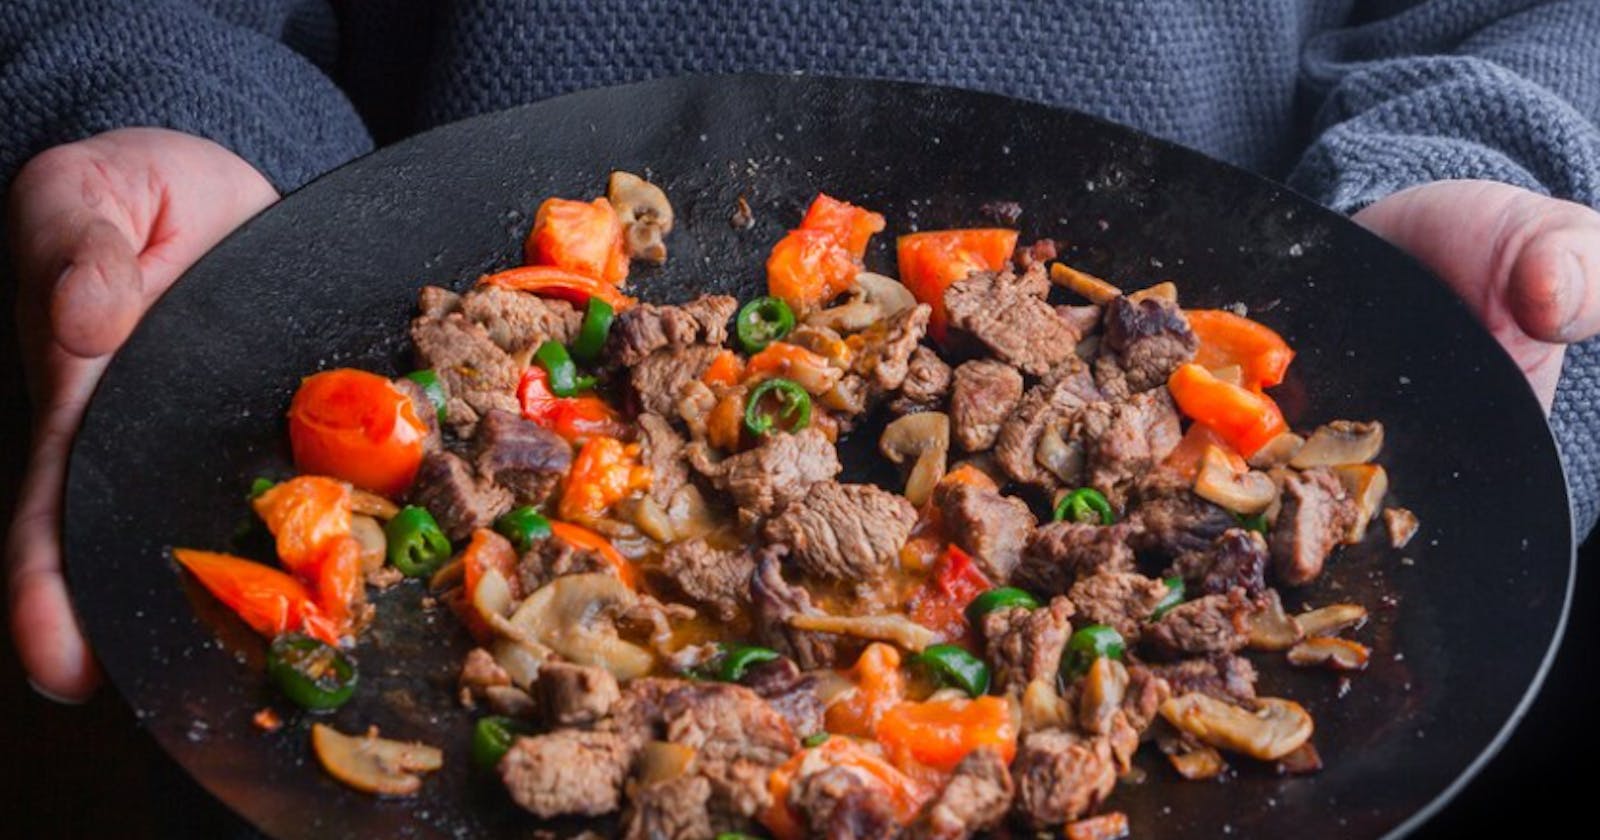 Savor the Favor: 4 Homemade Beef Recipes to Try